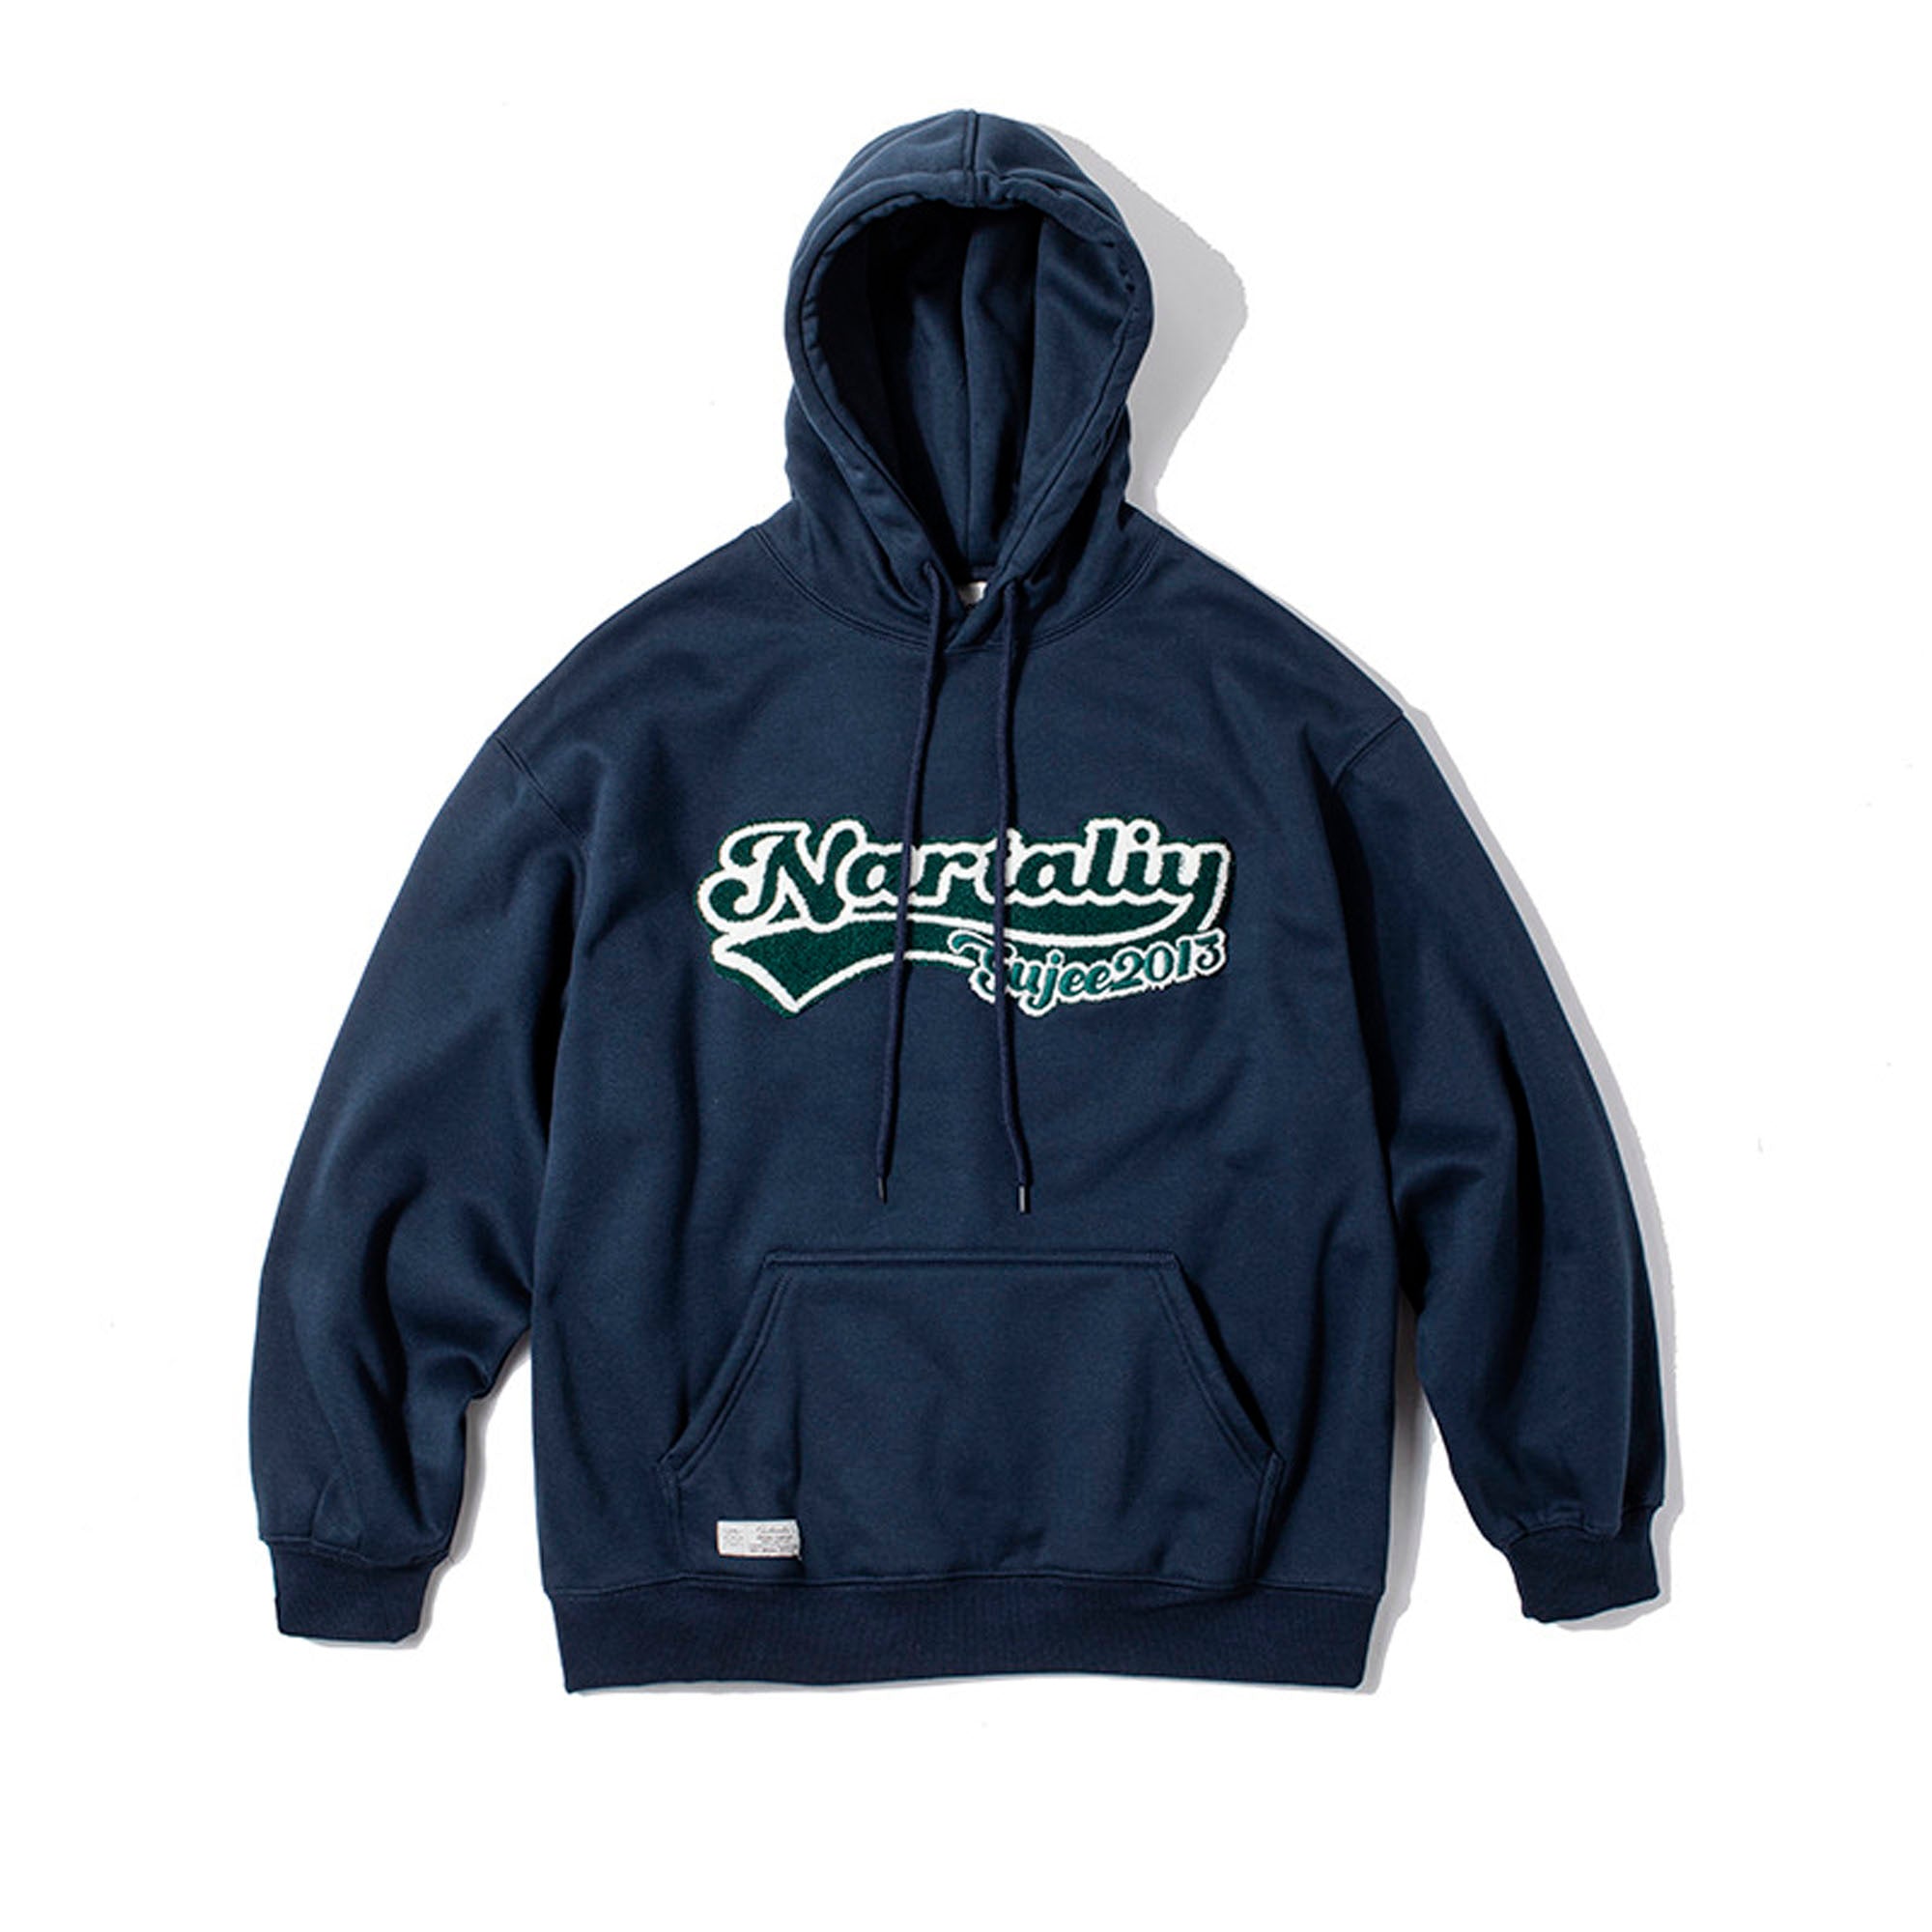 solid color towel embroidered hooded sweatshirt